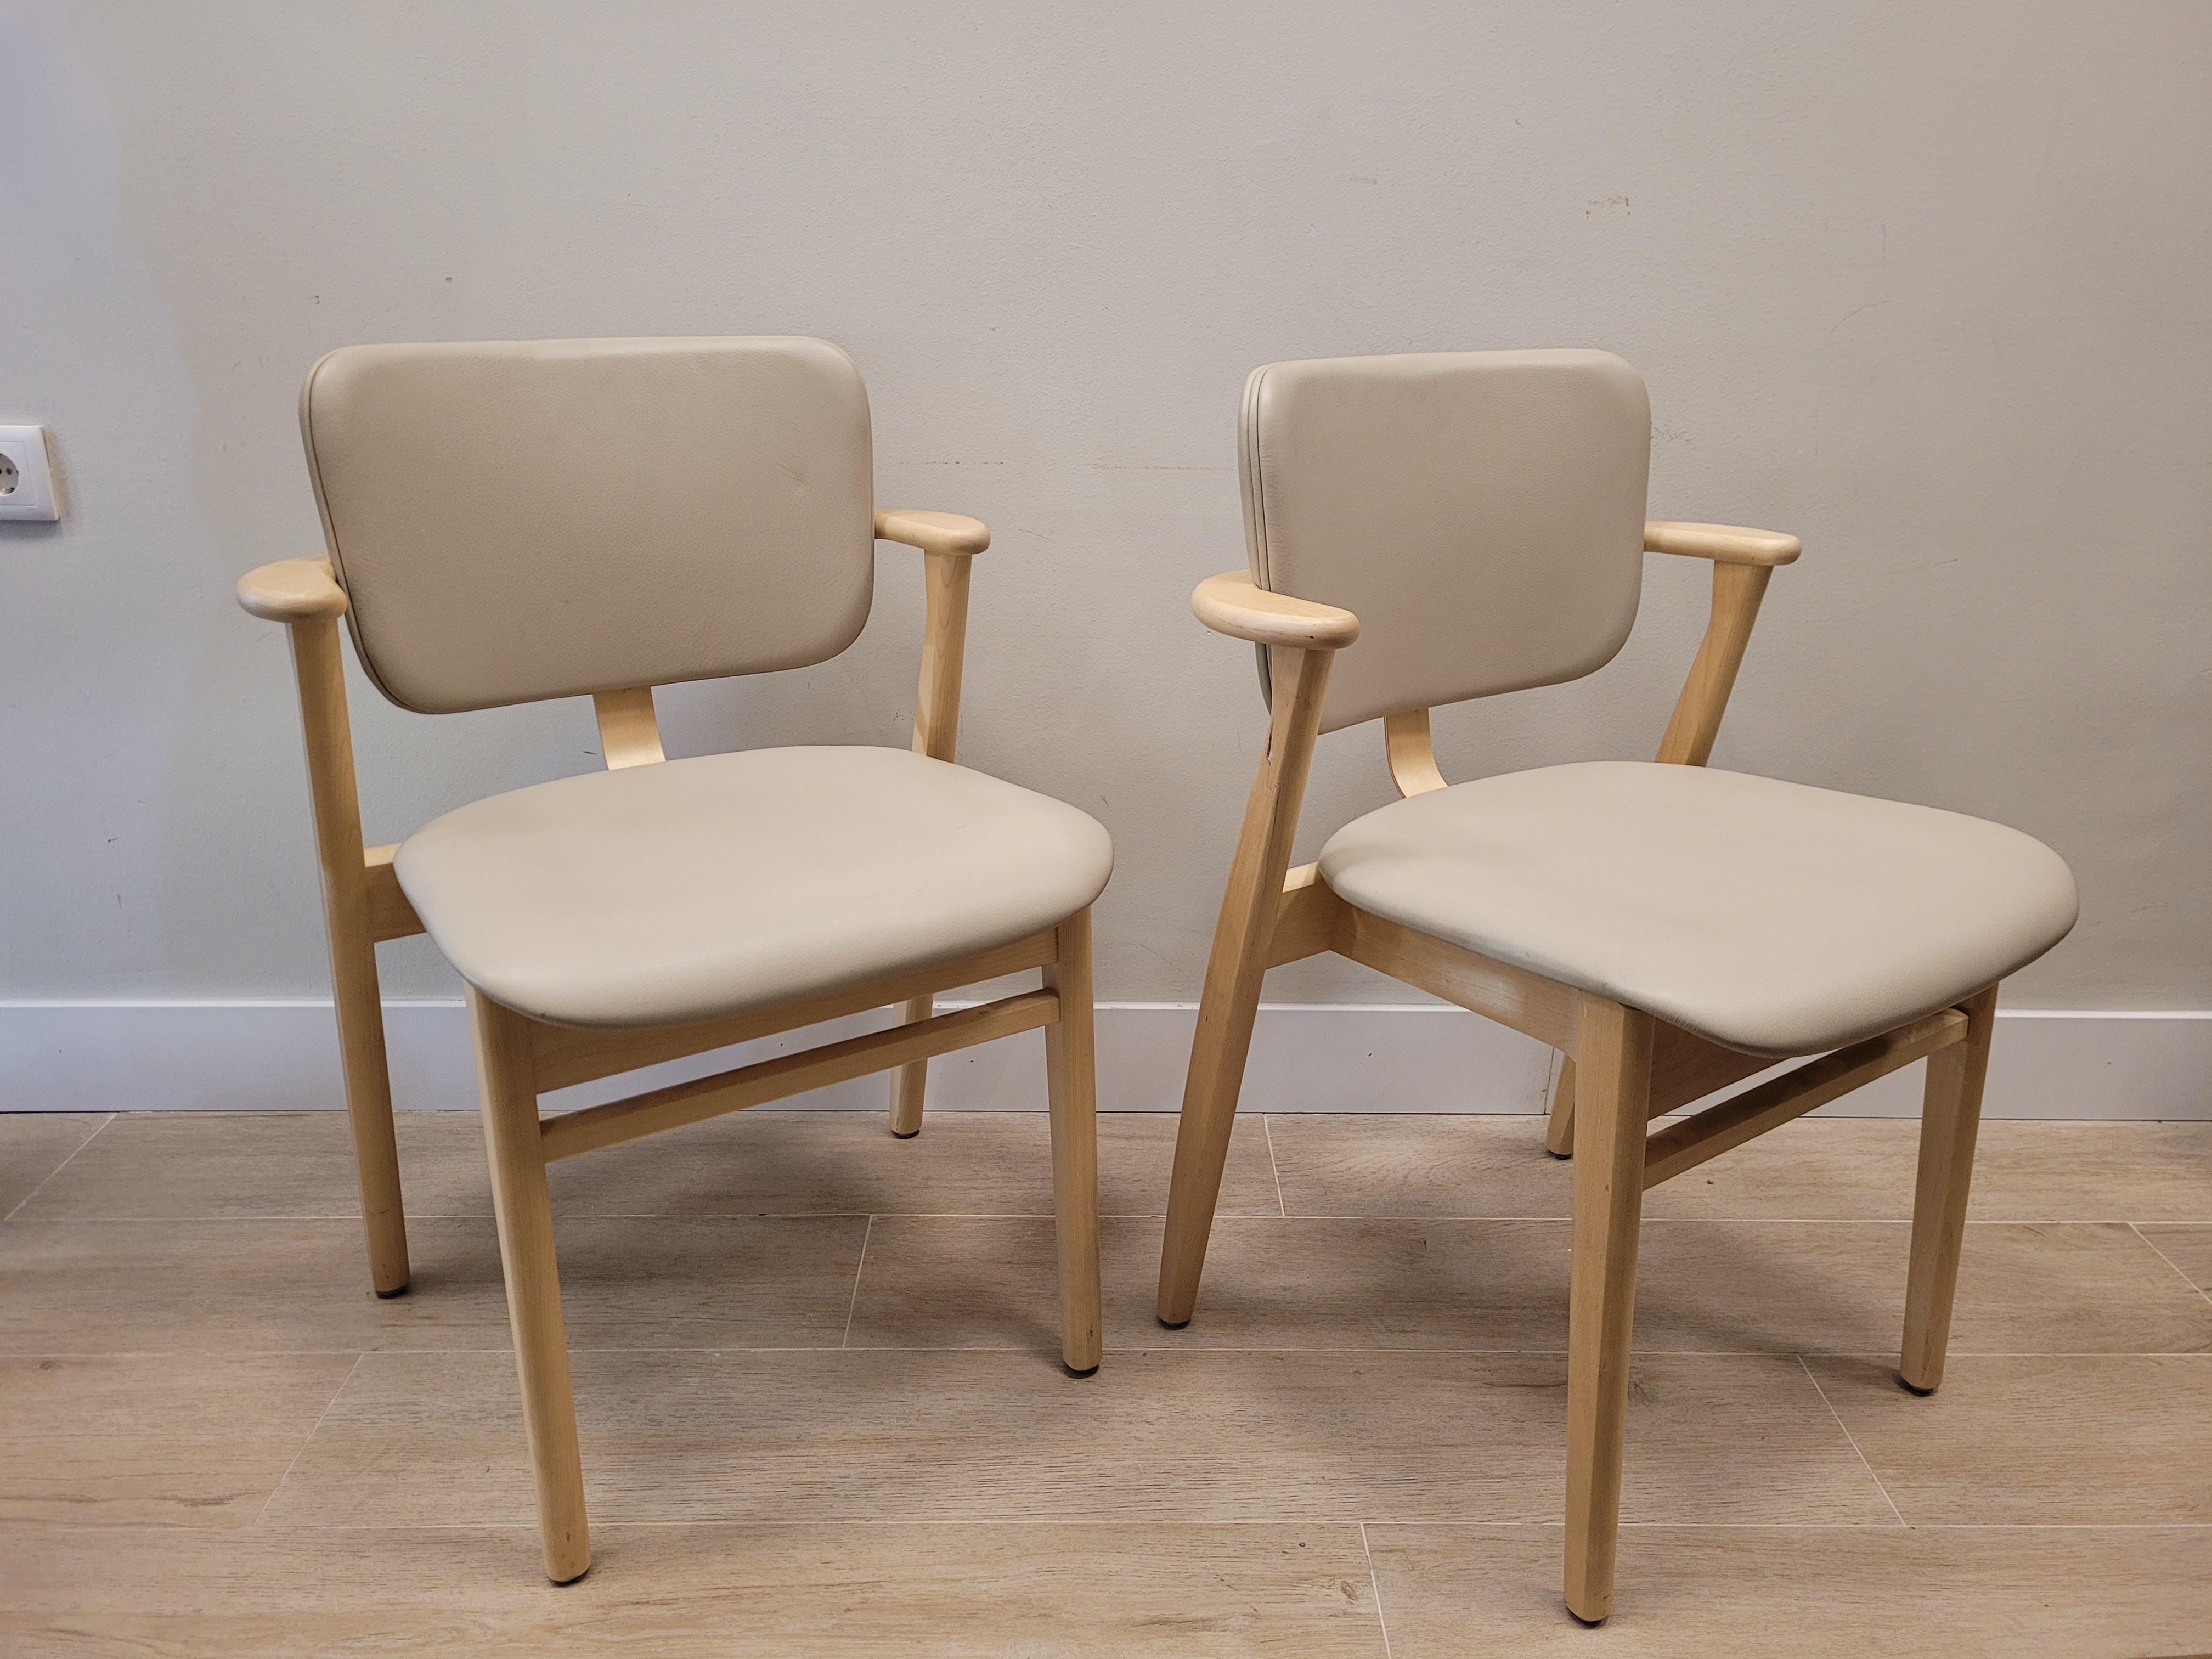 Beautiful Pair of DOMUS model chairs, designed by Ilmari Tapiovaara, with birch structure, seat and back in beige leather. It was created in 1946 as part of the furniture for the Domus Academica student housing complex in Helsinki, soon becoming a